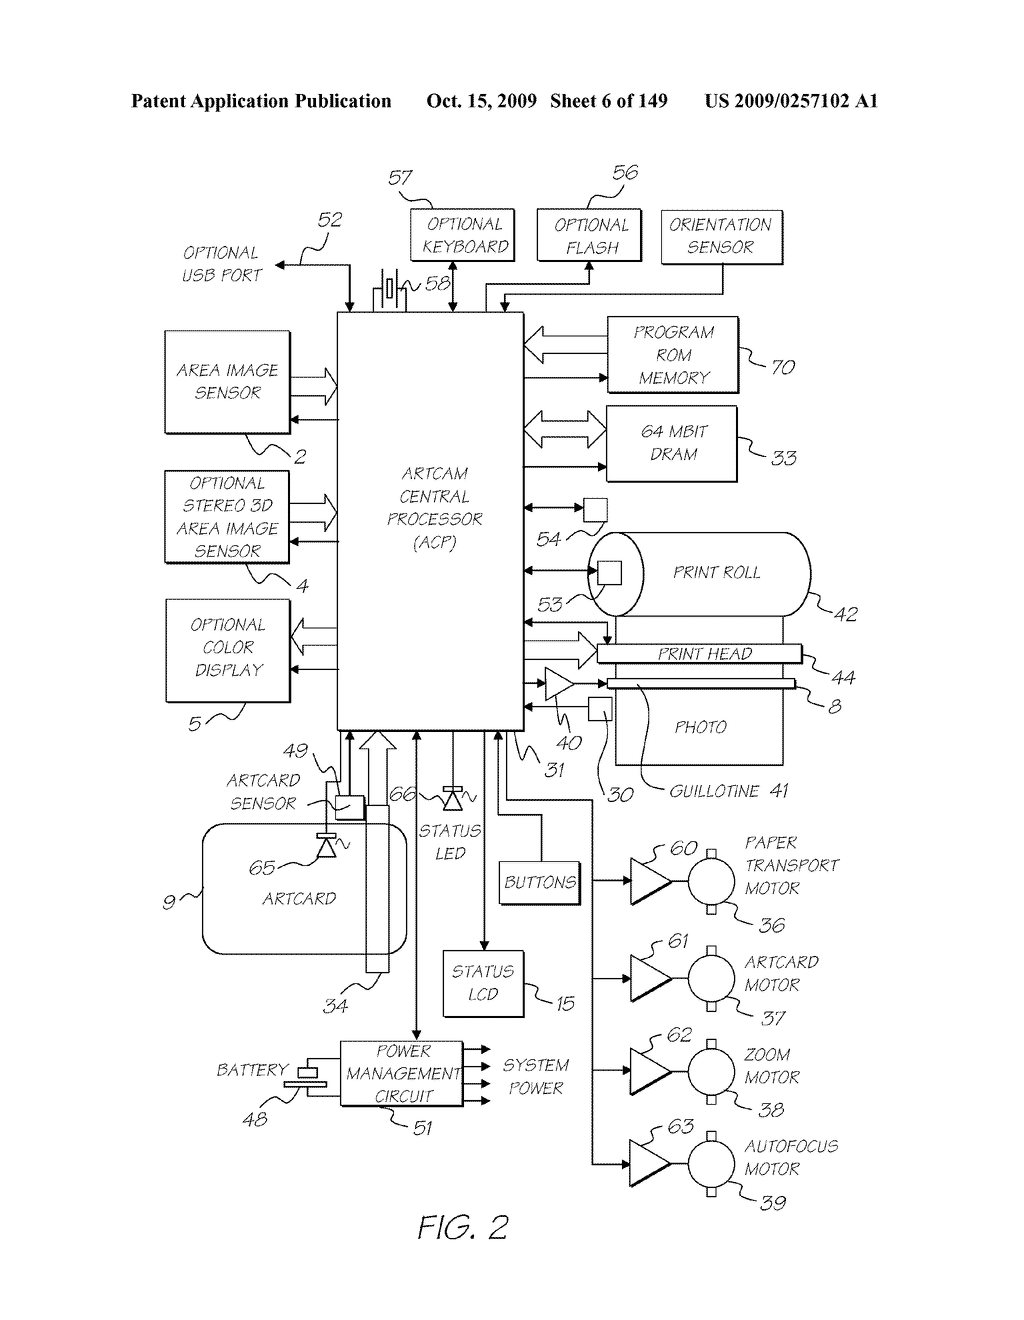 IMAGE PROCESSING APPARATUS HAVING CARD READER FOR APPLYING EFFECTS STORED ON A CARD TO A STORED IMAGE - diagram, schematic, and image 07